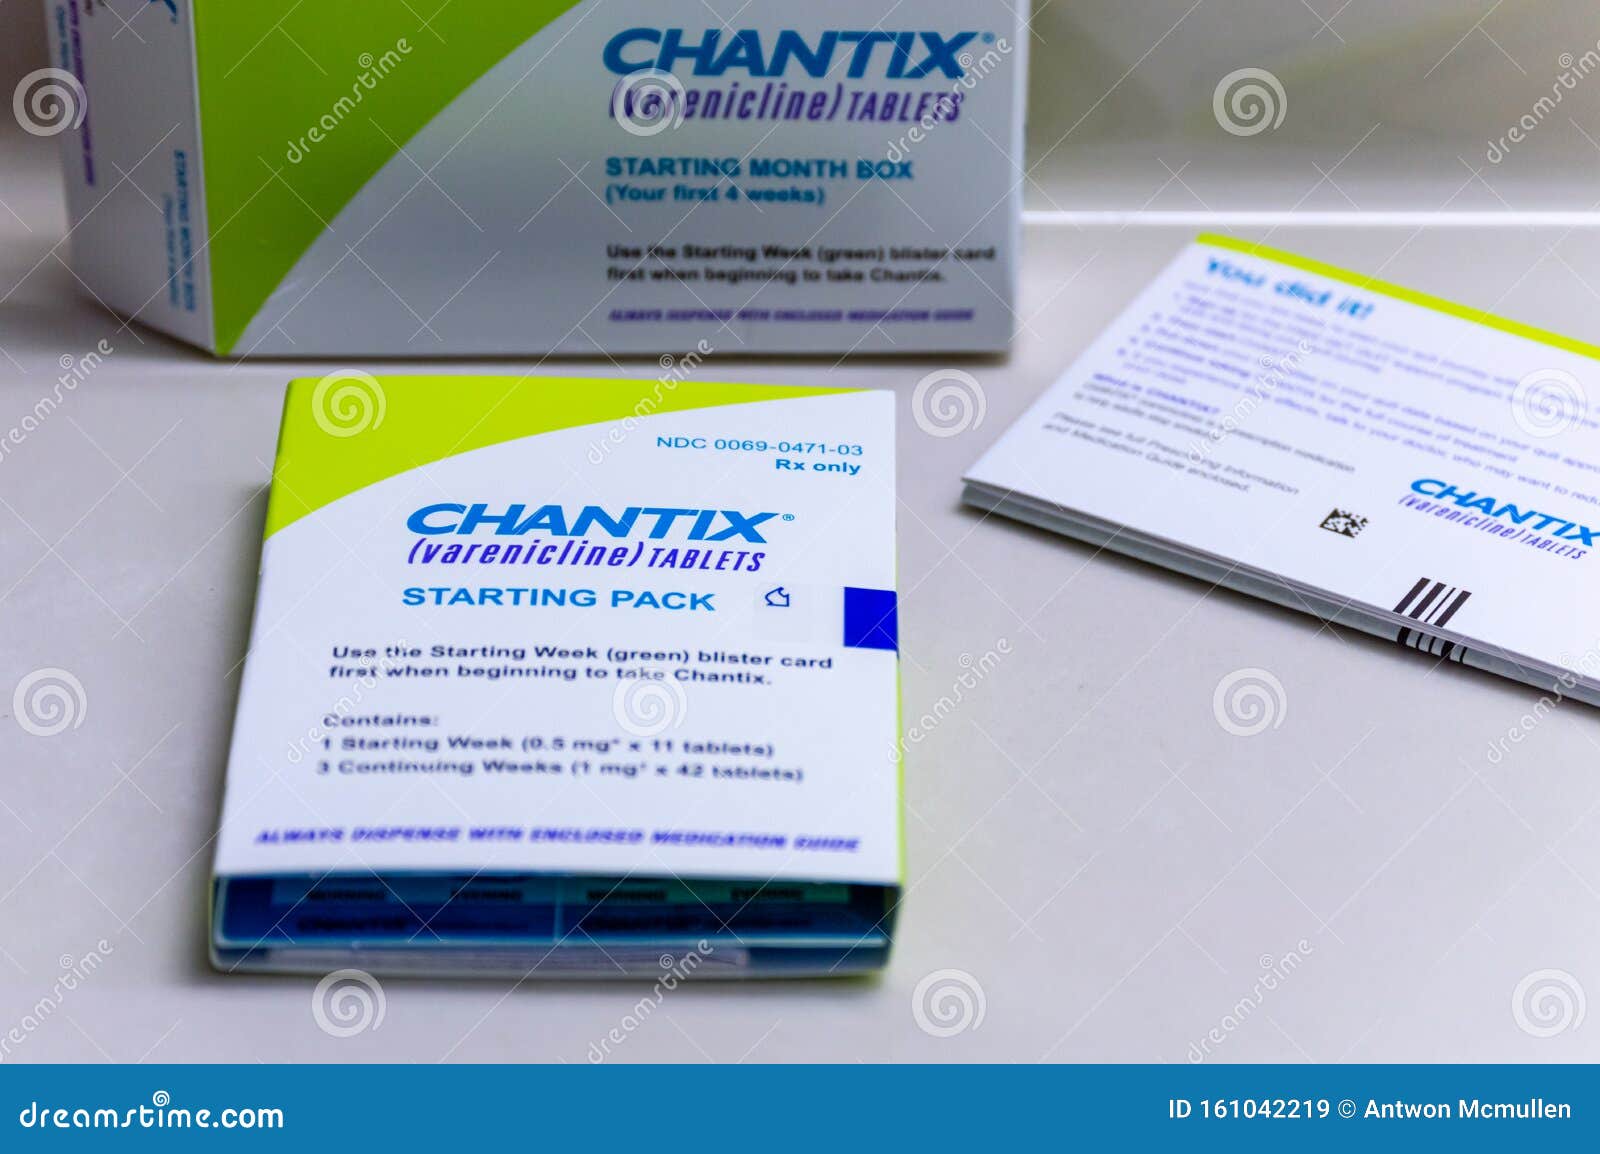 A Box of Chantix Medication with Guides and Warnings on a Counter